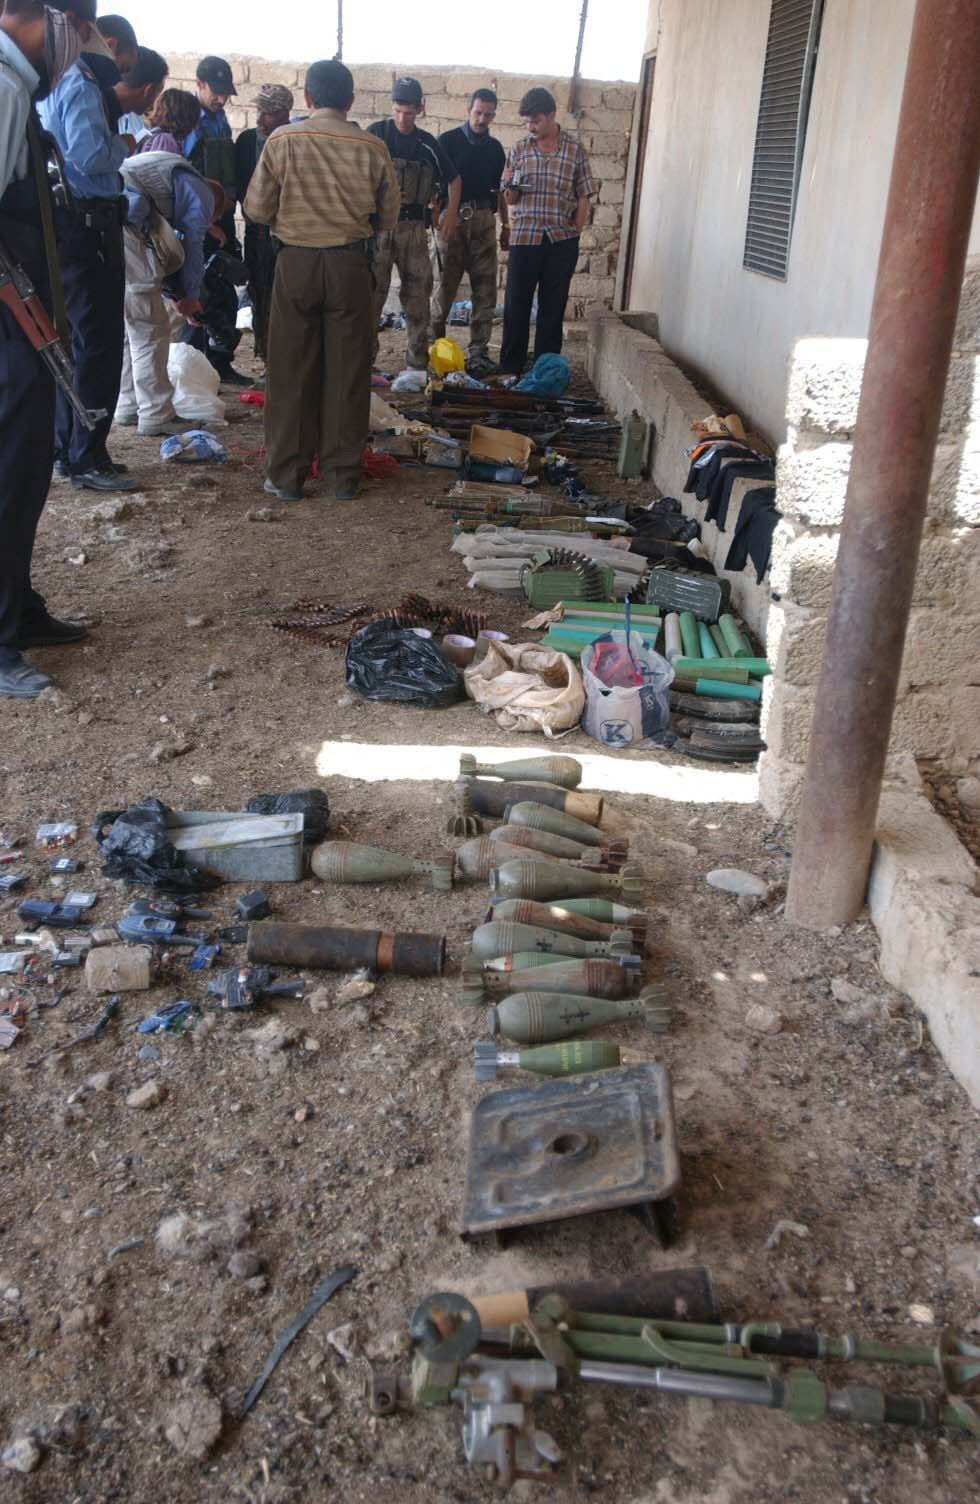 Iraqi Police inventory a weapons cache